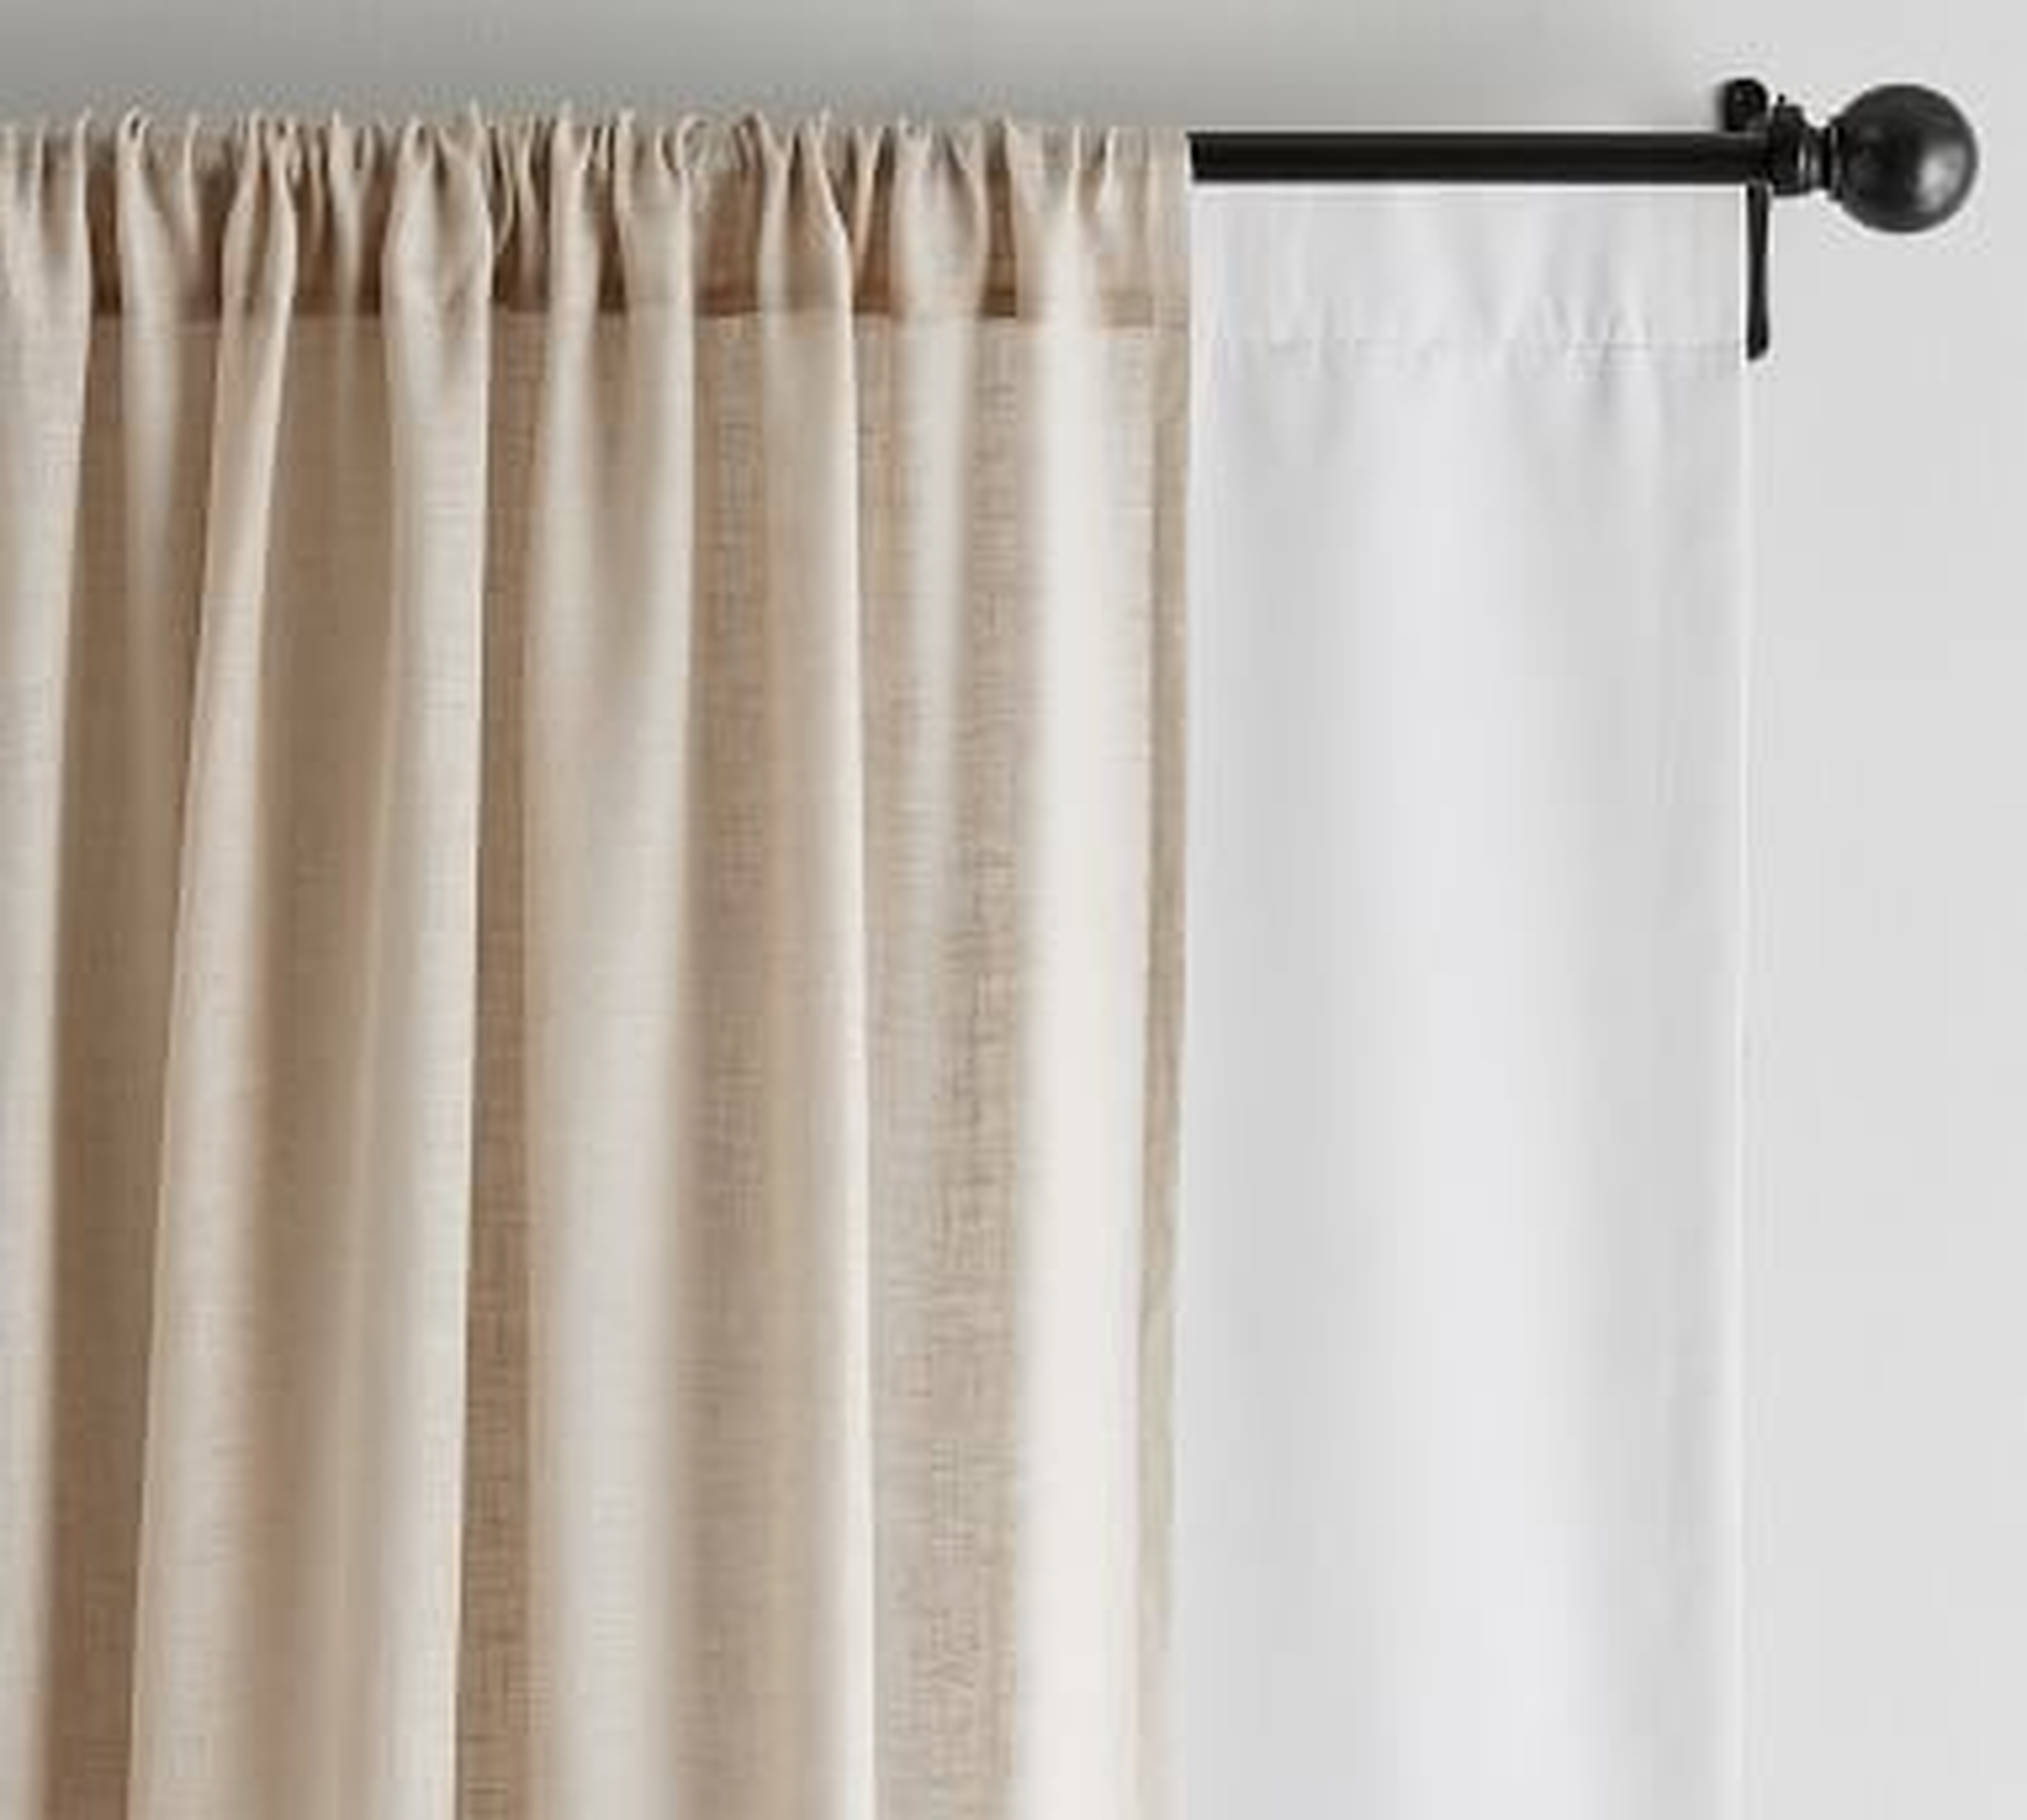 Universal Blackout Curtain Liner, 50 x 84", Off White - Pottery Barn